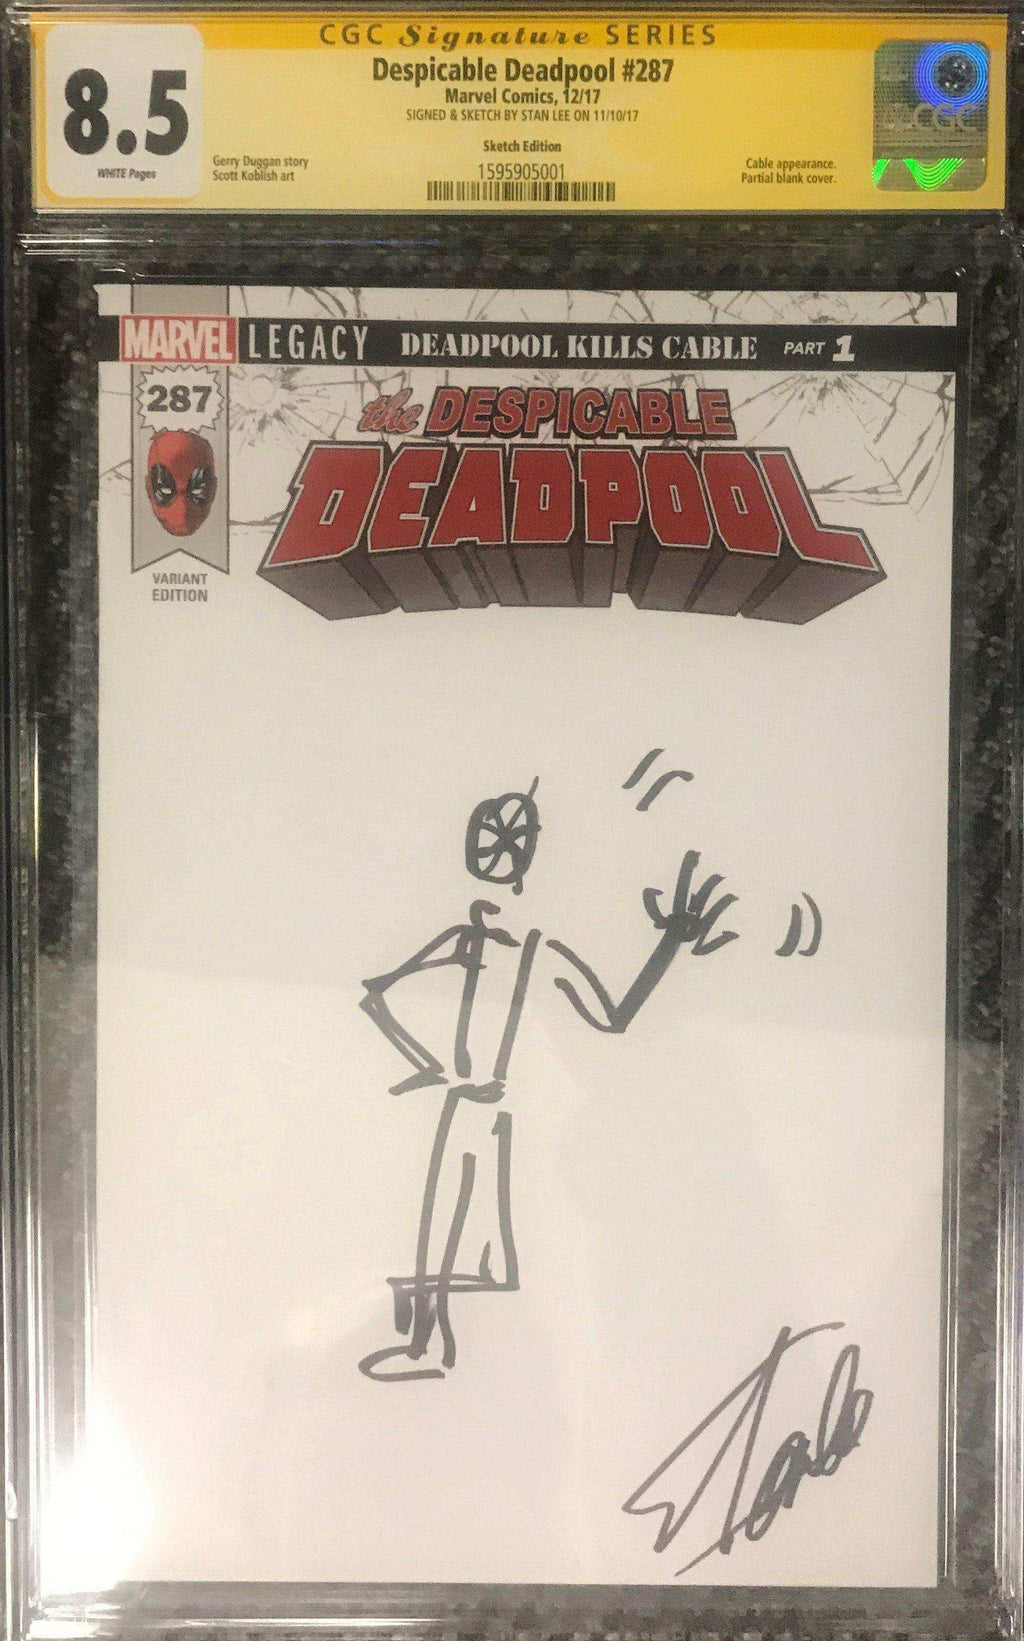 DESPICABLE DEADPOOL #287 MARVEL COMICS CGC GRADED: SIGNED AND SKETCHED BY STAN LEE CGC Graded Marvel Comic MARVEL FINE ART 